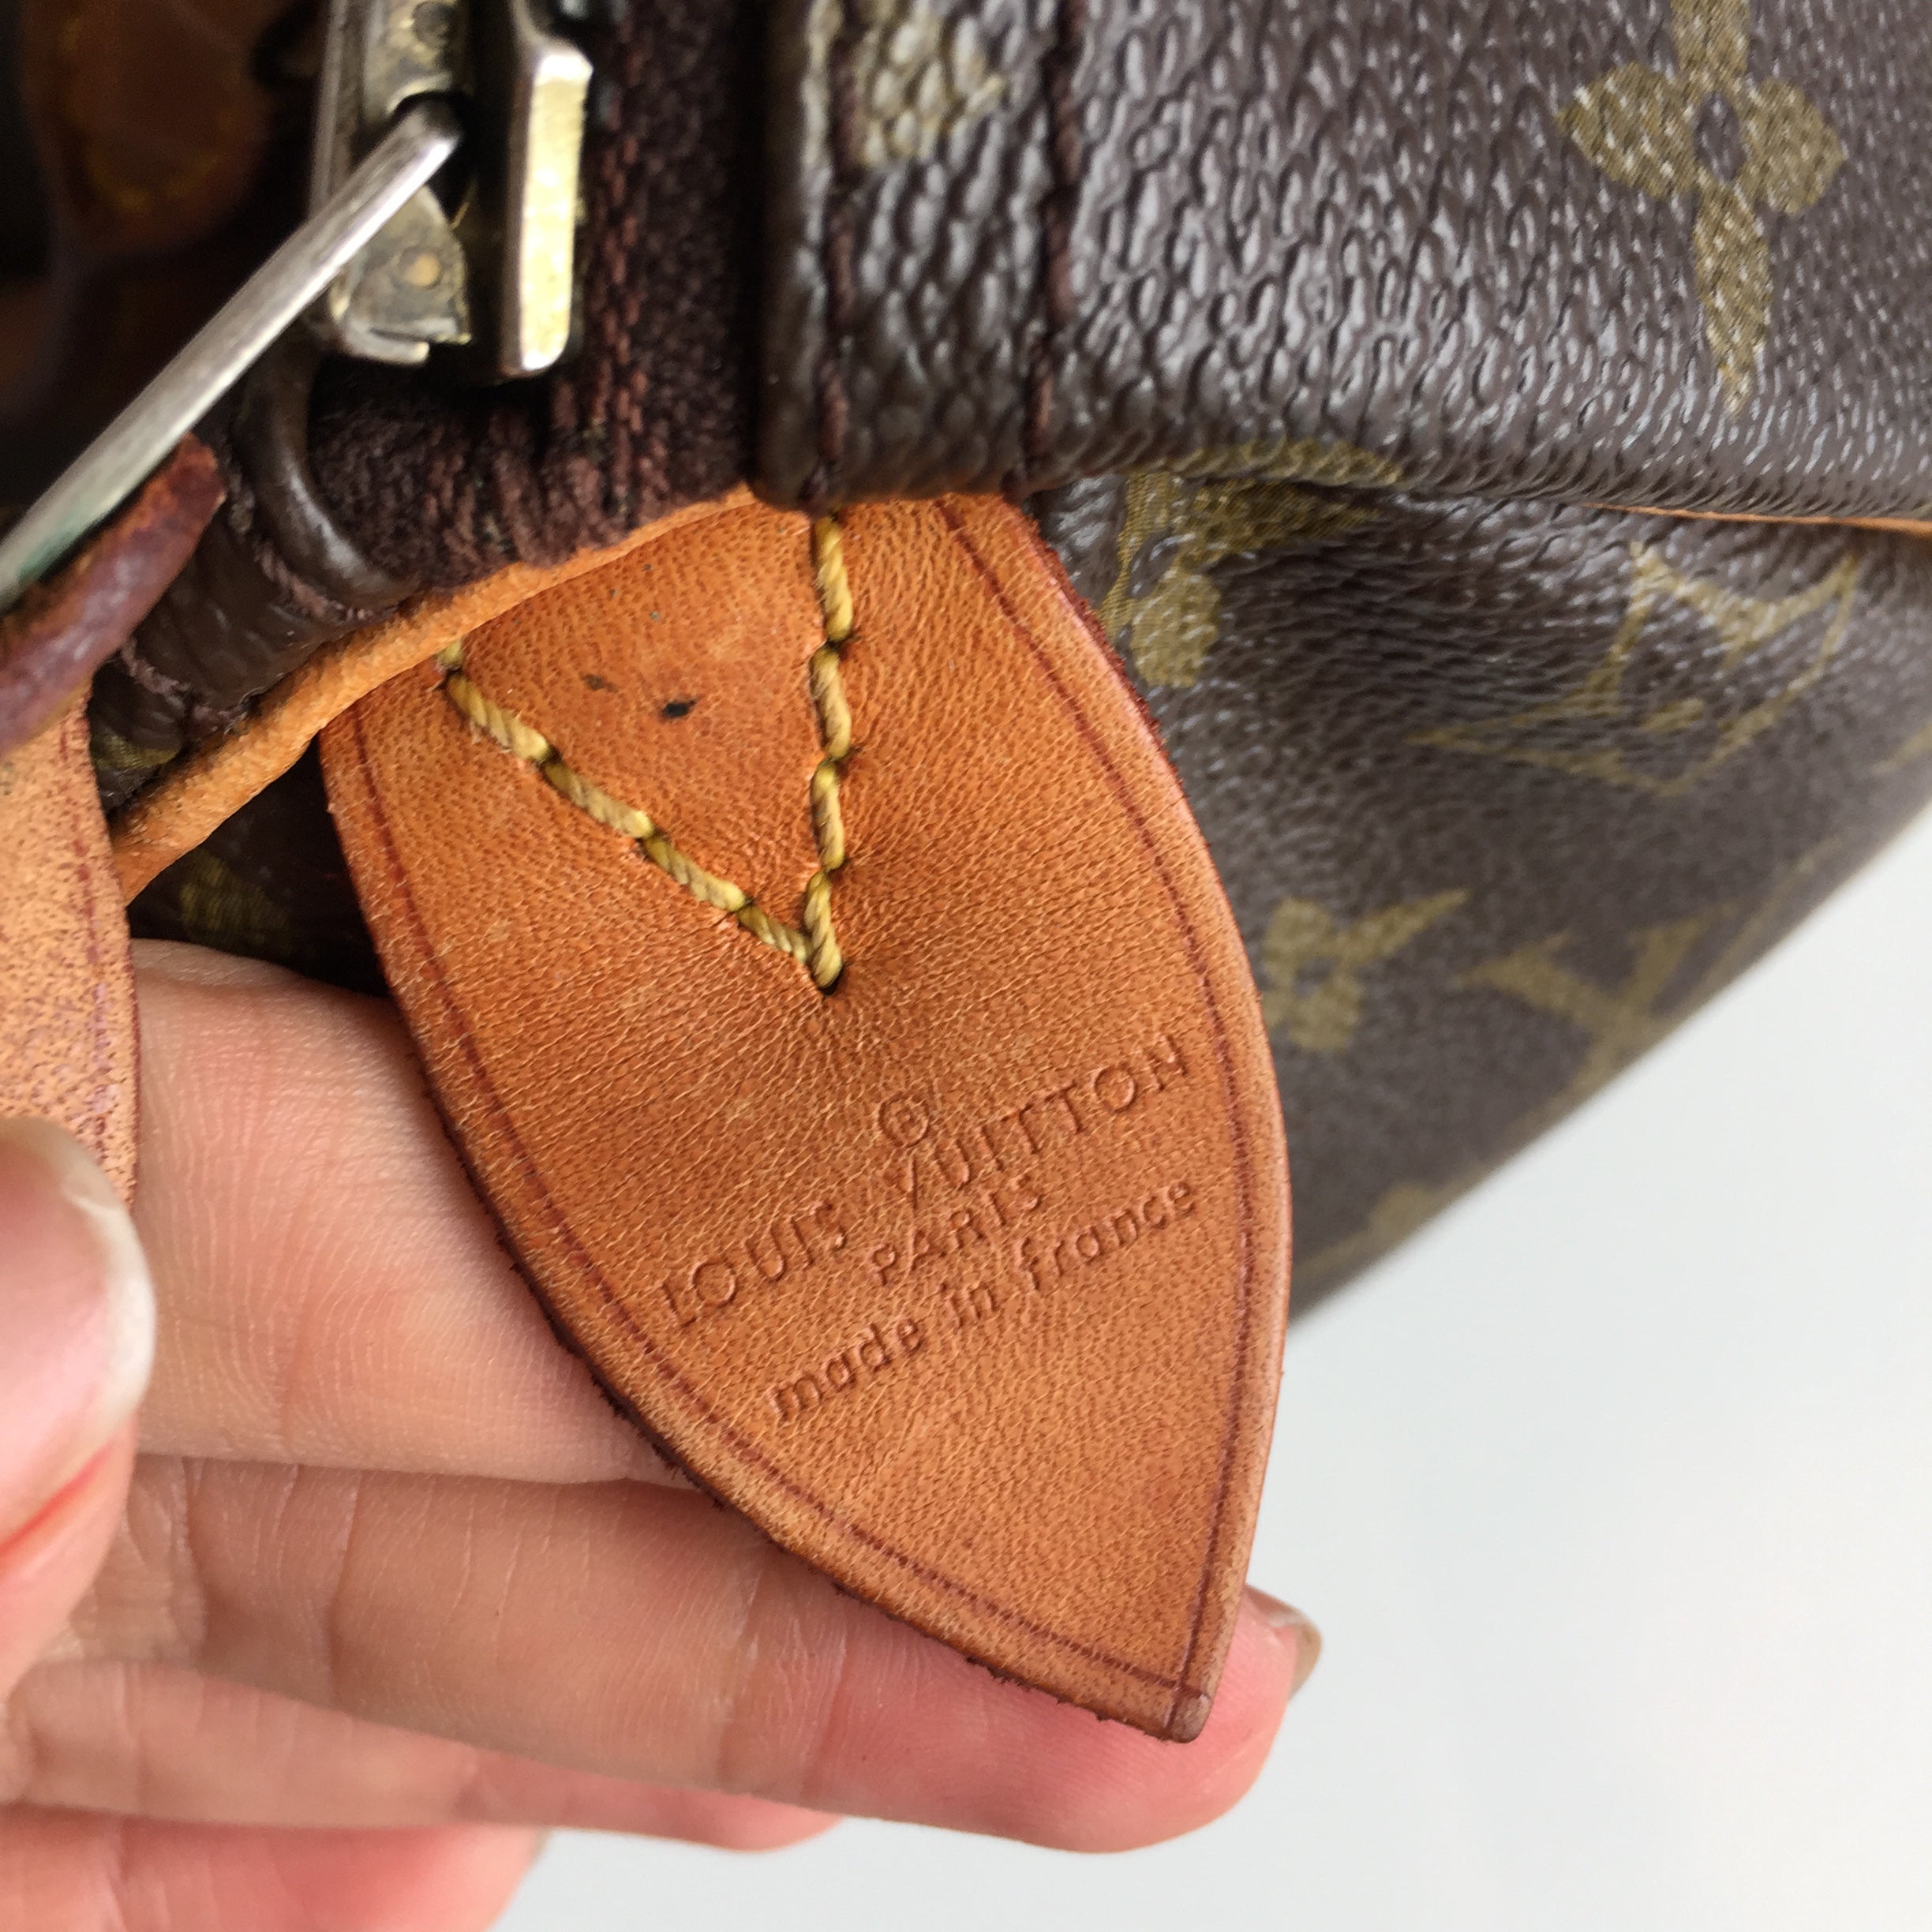 Louis Vuitton Bag Cost In France